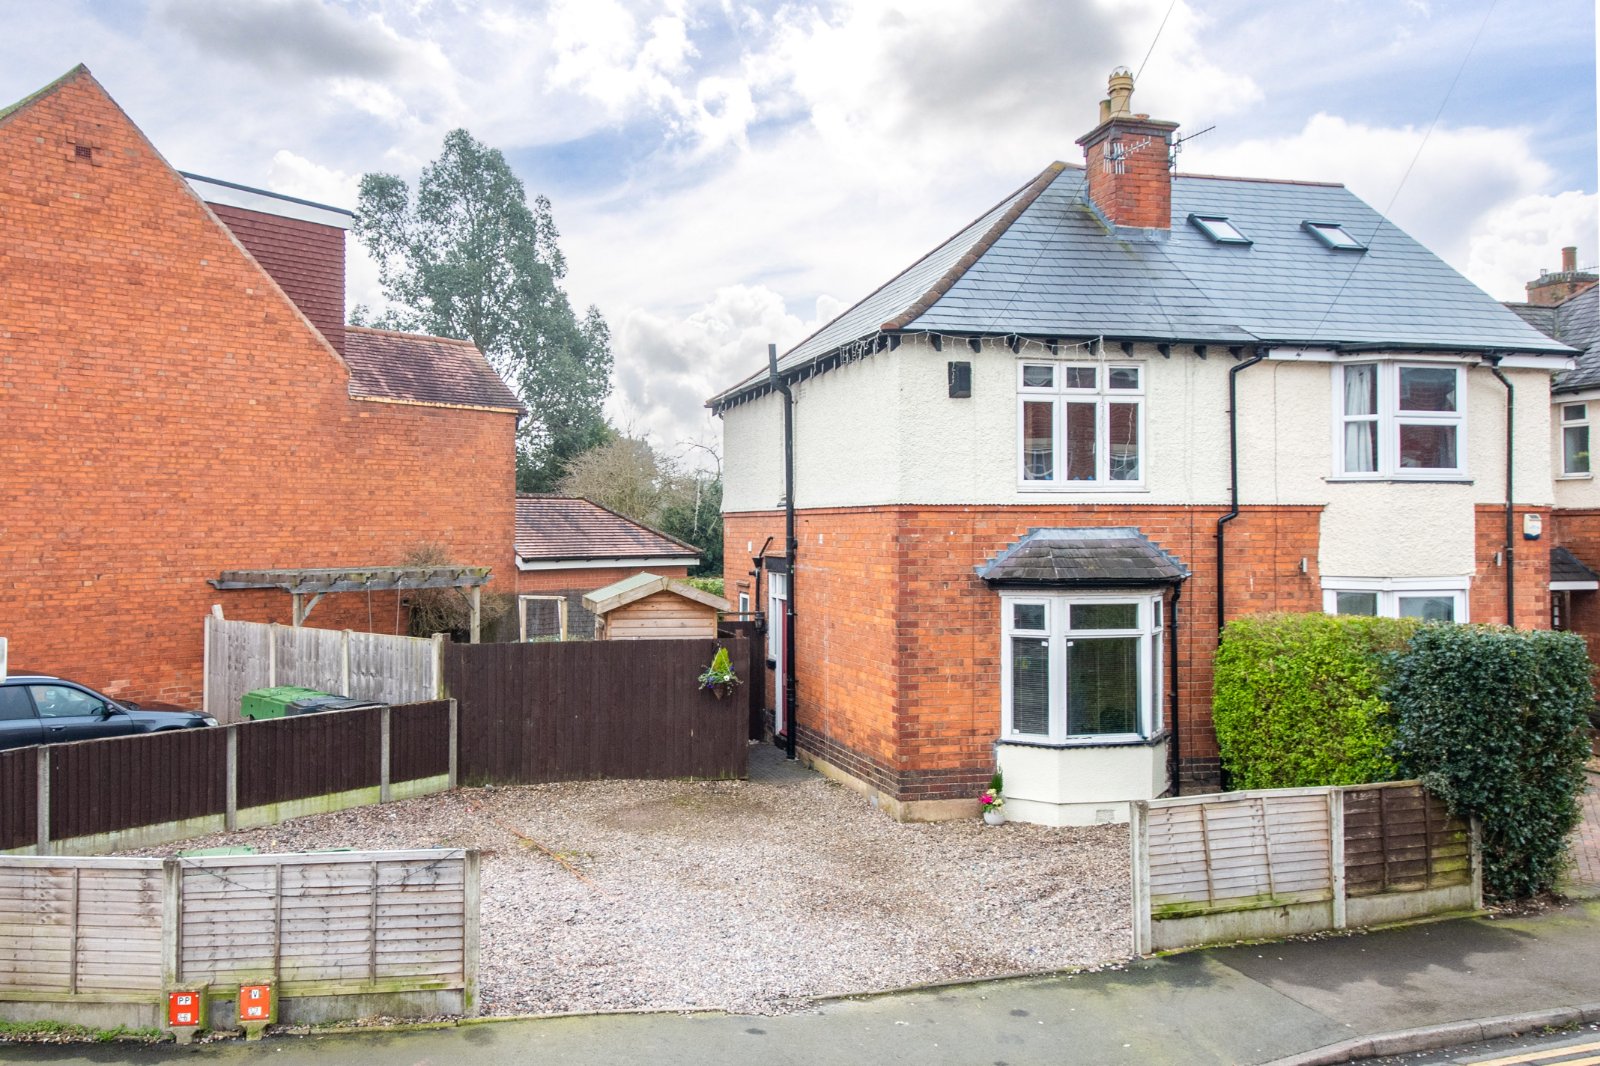 2 bed house for sale in All Saints Road, Bromsgrove - Property Image 1